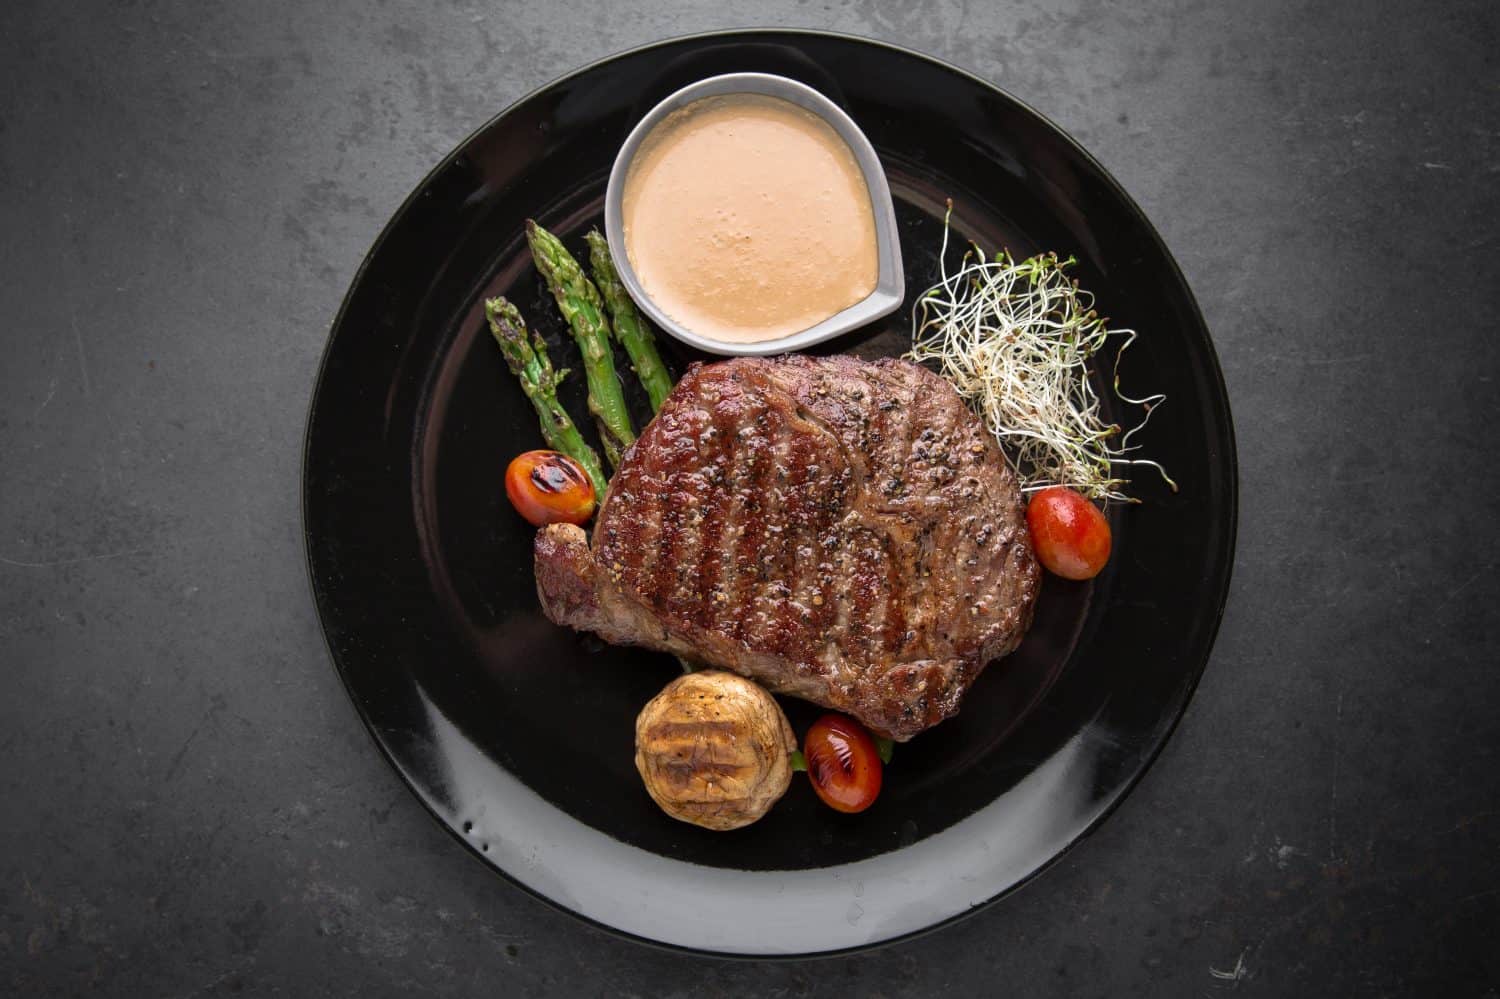 Beef steak with spices, grilled vegetables, asparagus and cream sauce. Gourmet dish